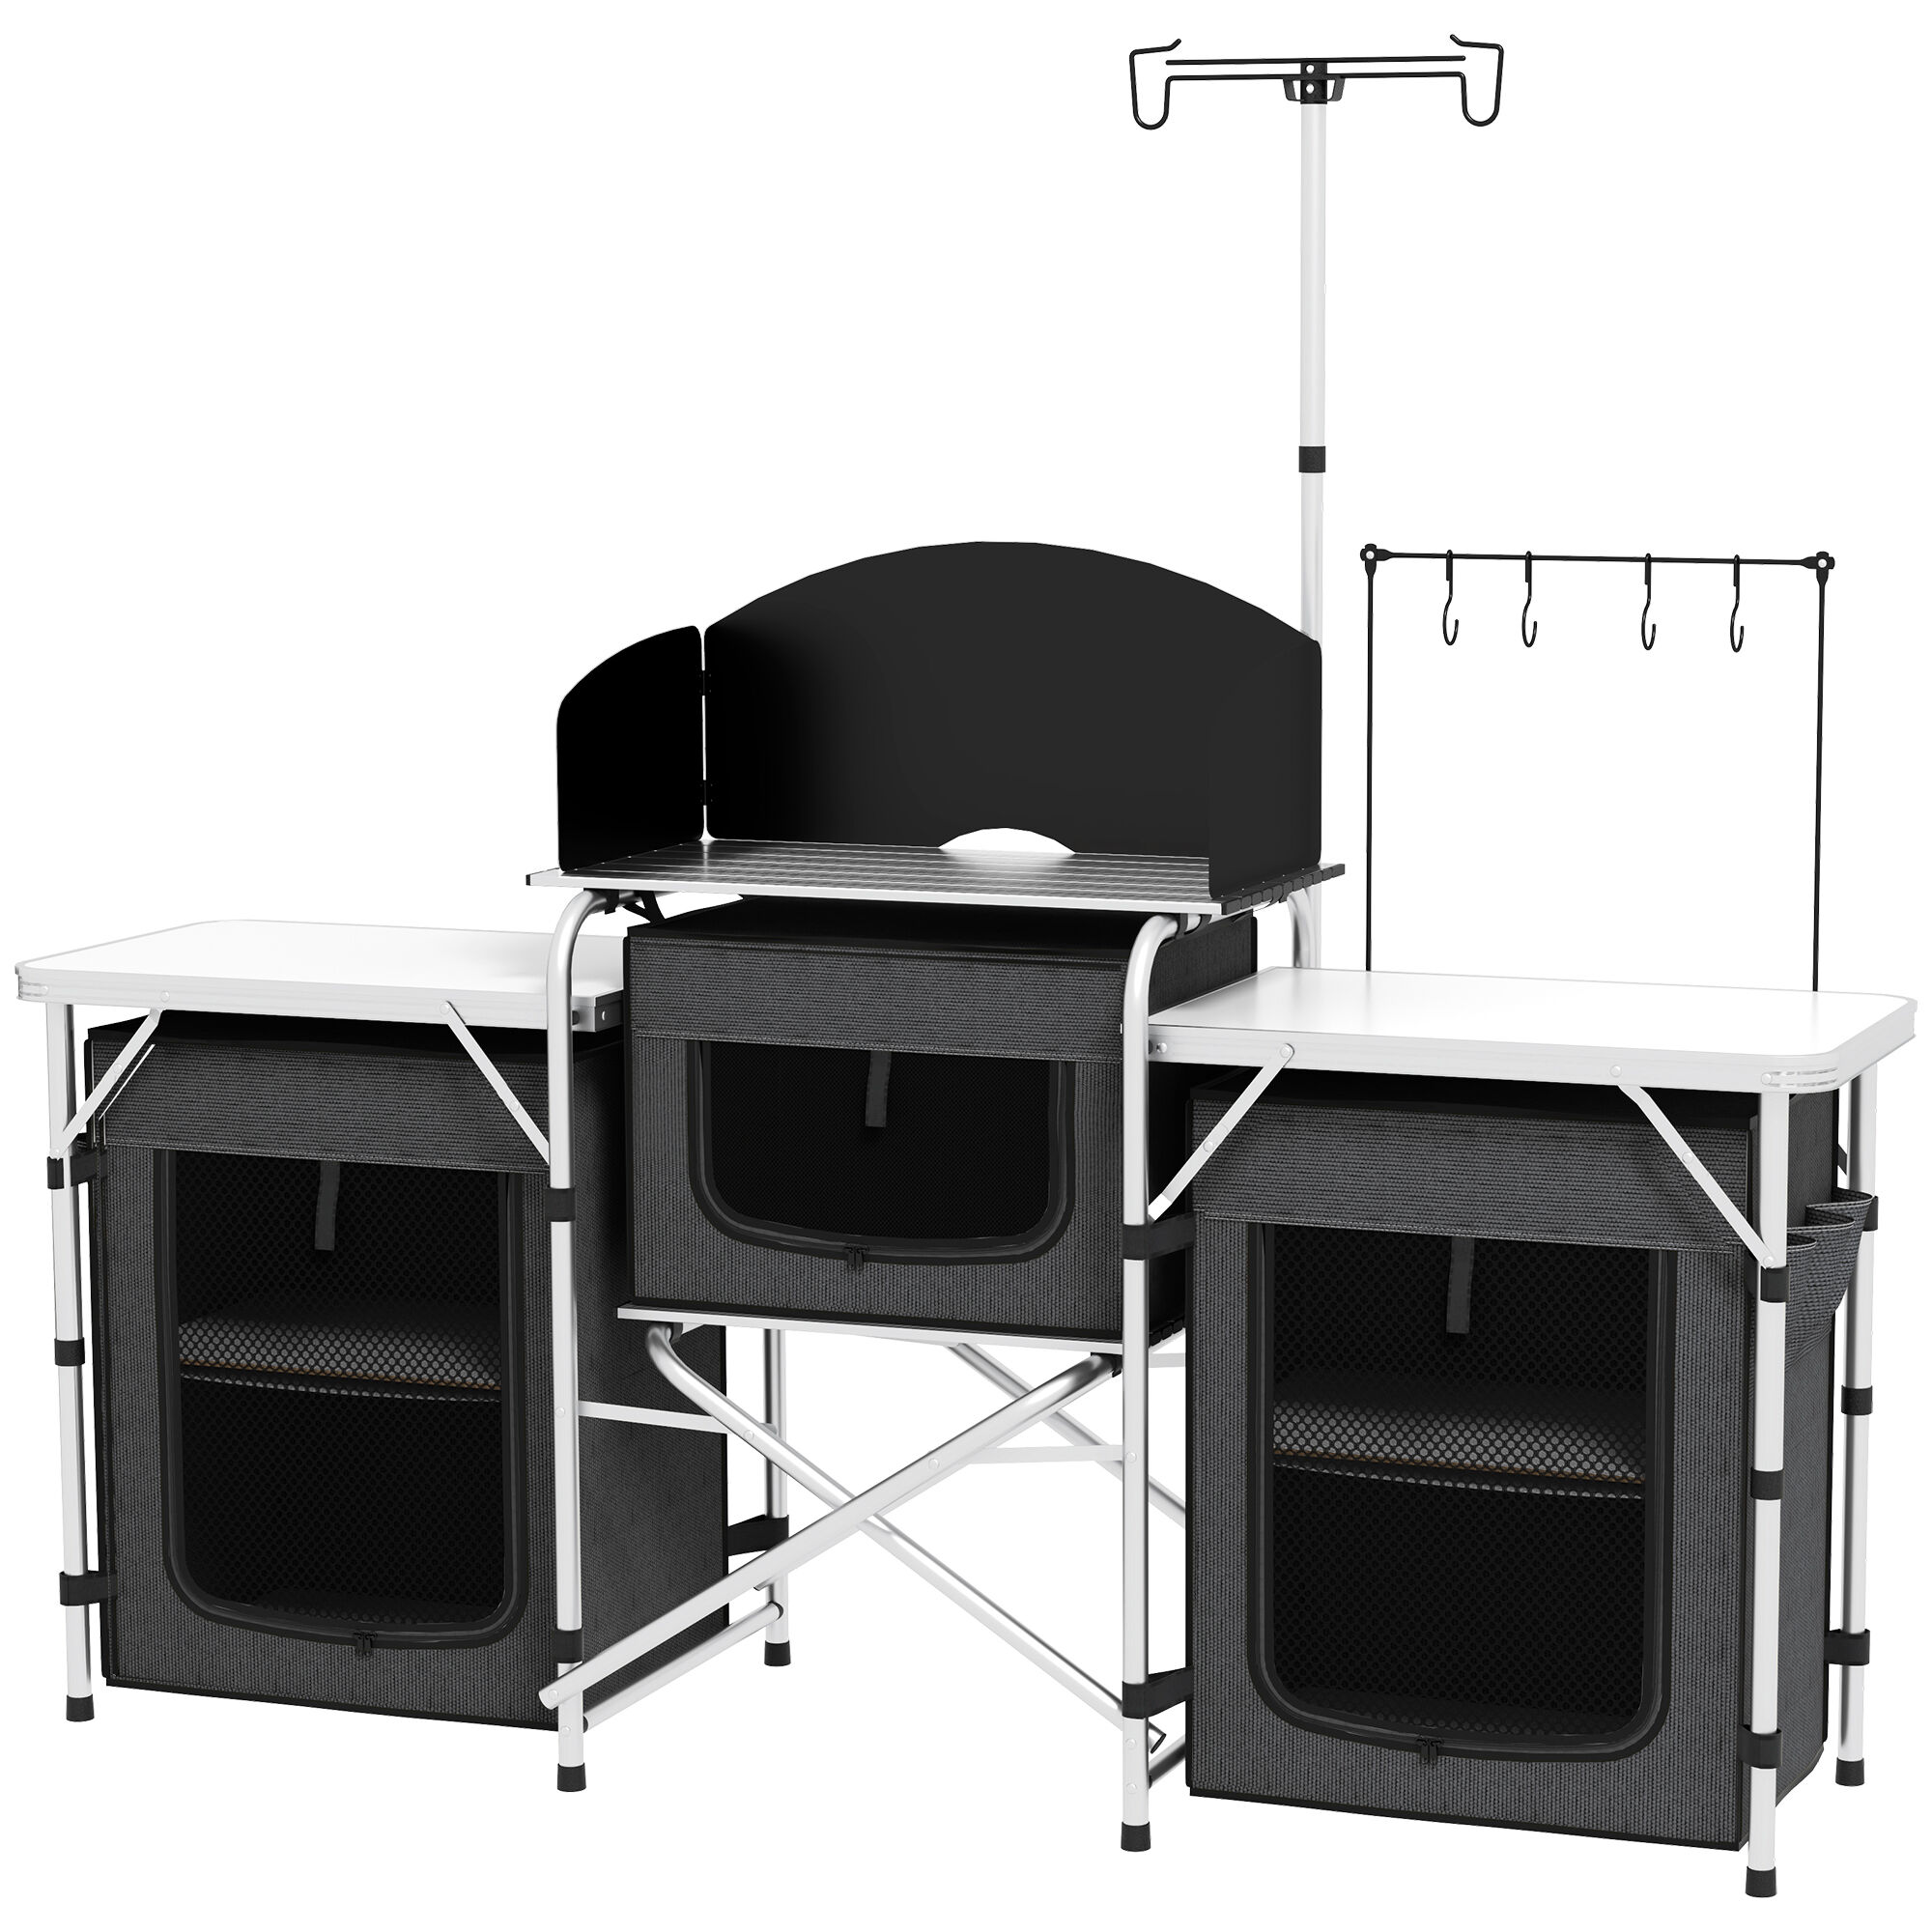 Outsunny Portable Camping Kitchen Table with Storage Windshield for BBQ Picnic Black   Aosom.com